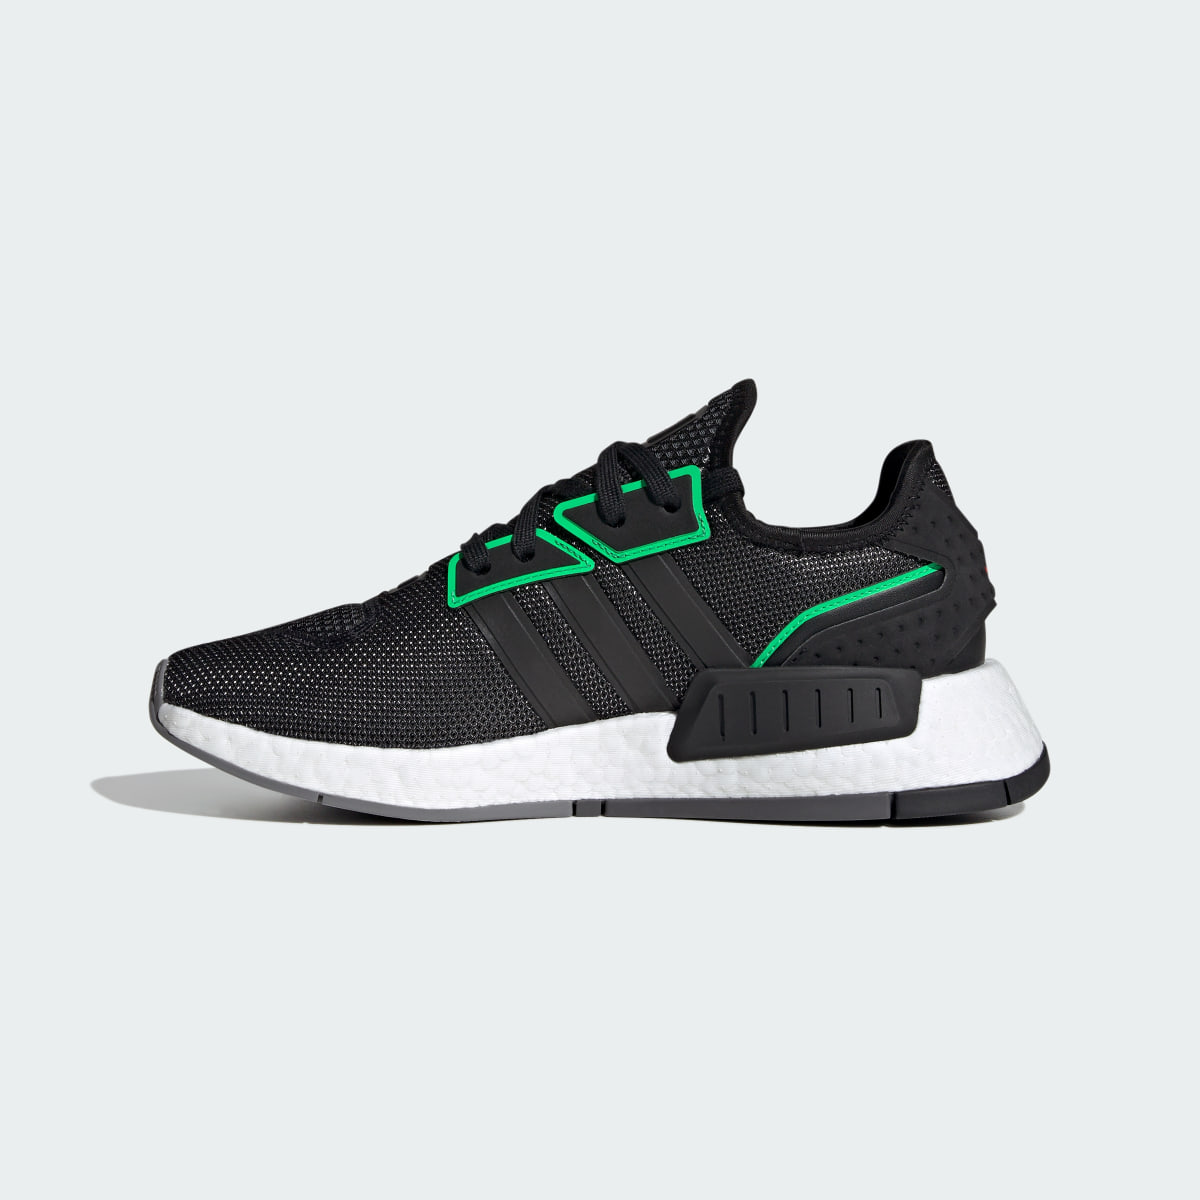 Adidas NMD_G1 Shoes. 13